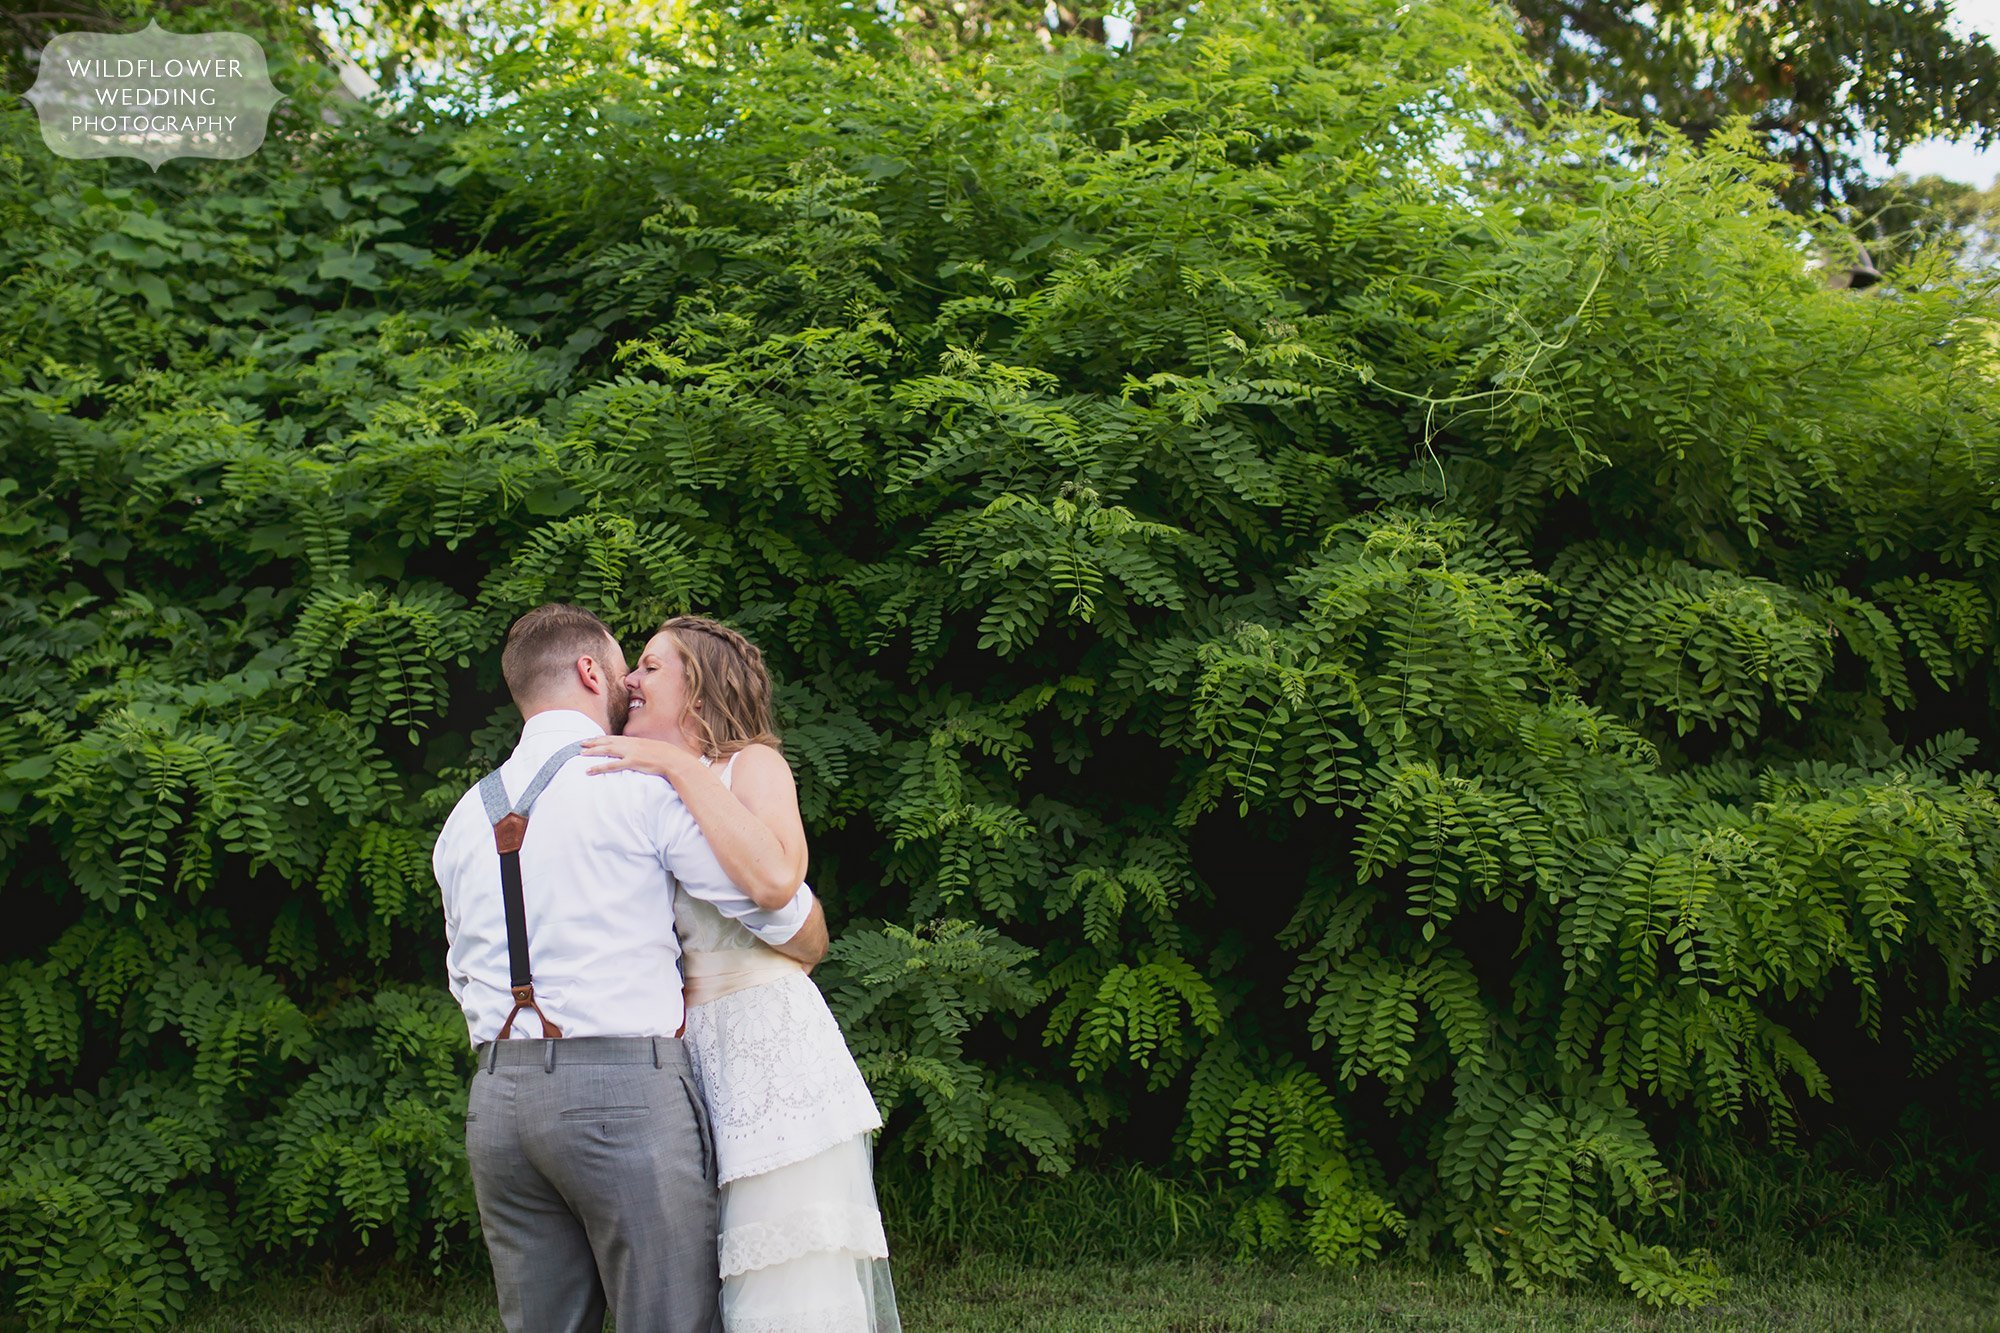 Outdoor wedding photography portrait of the bride and groom dancing in front of a wall of greenery along the Katy Trail in Rocheport, MO.